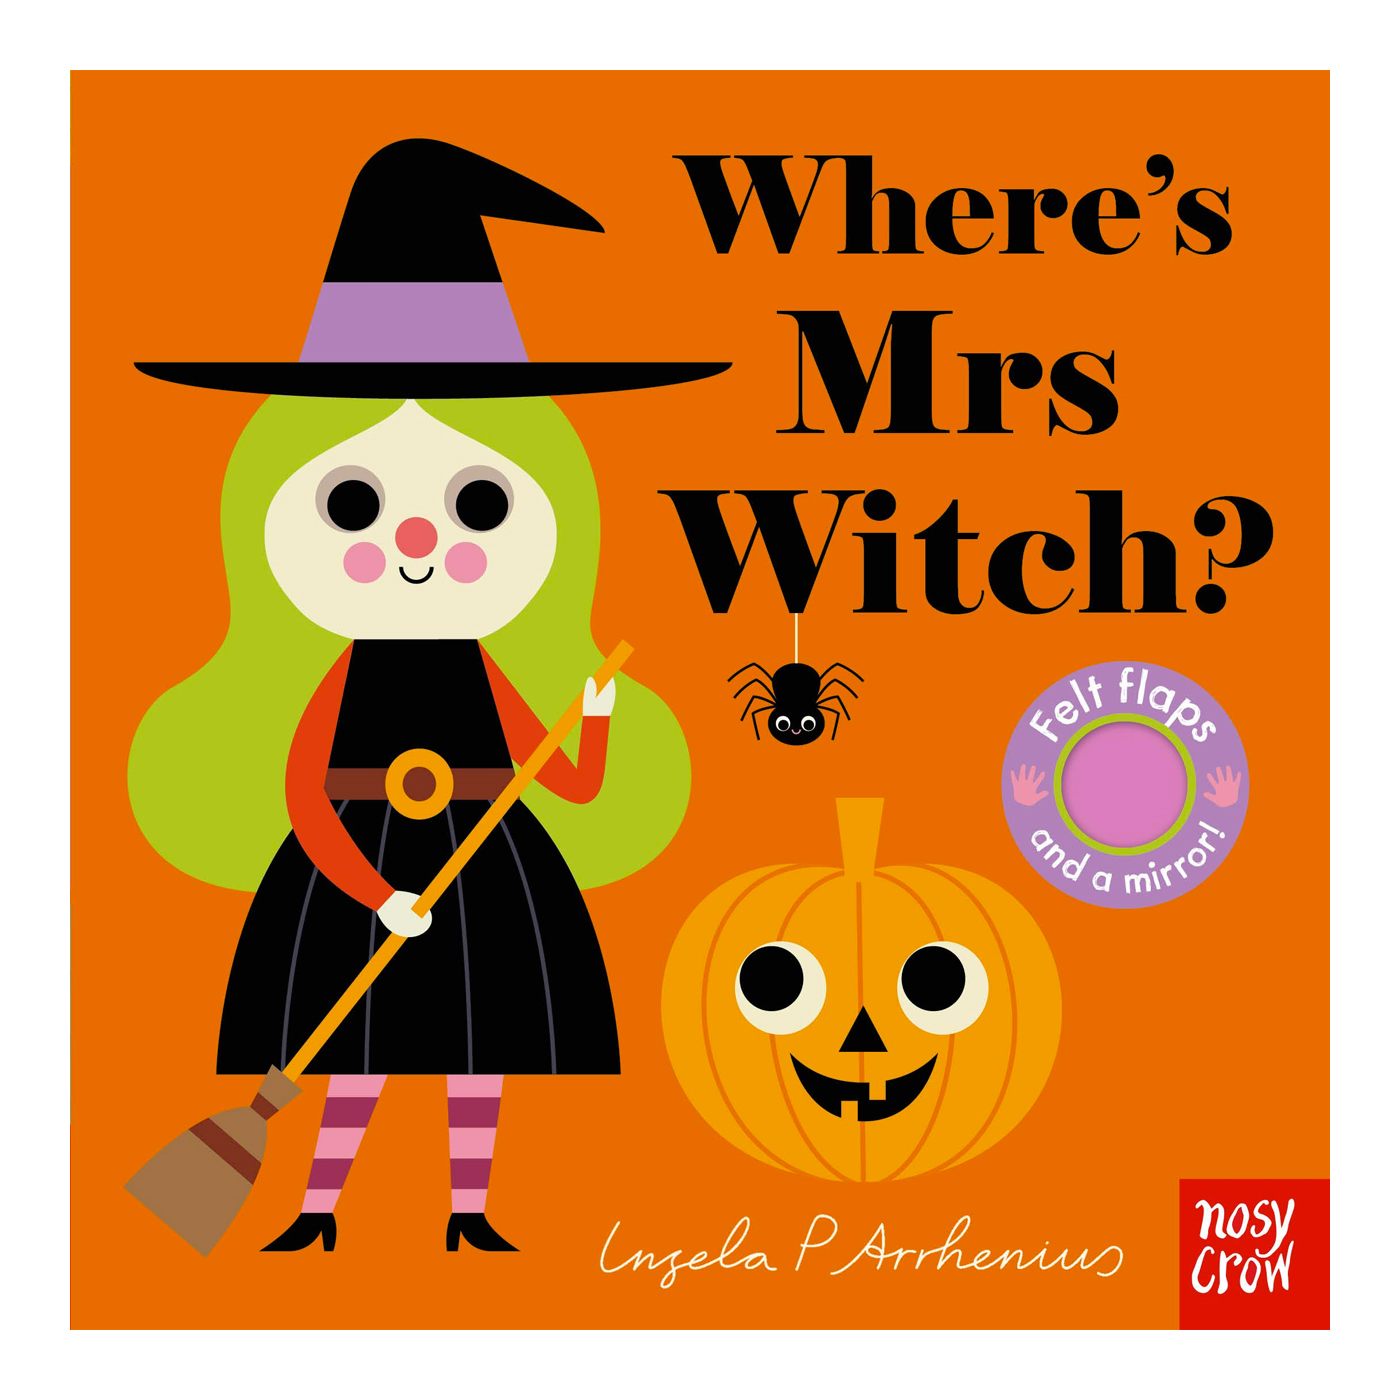  Where's Mrs Witch?